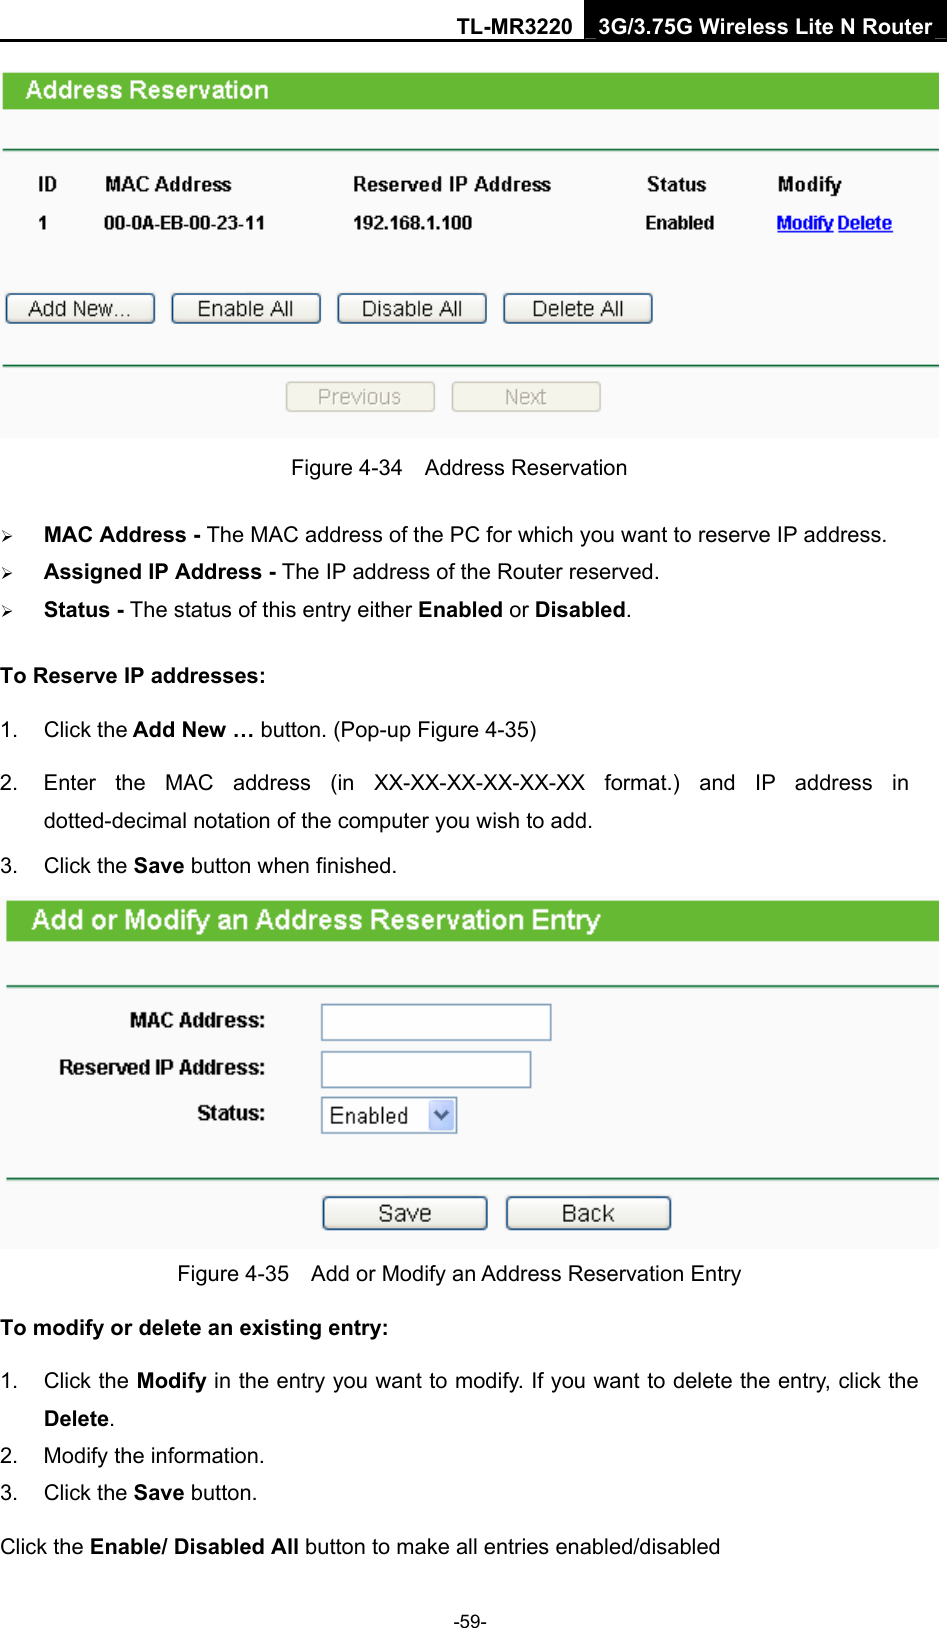 TL-MR3220 3G/3.75G Wireless Lite N Router -59-  Figure 4-34  Address Reservation ¾ MAC Address - The MAC address of the PC for which you want to reserve IP address. ¾ Assigned IP Address - The IP address of the Router reserved. ¾ Status - The status of this entry either Enabled or Disabled. To Reserve IP addresses:  1. Click the Add New … button. (Pop-up Figure 4-35) 2.  Enter the MAC address (in XX-XX-XX-XX-XX-XX format.) and IP address in dotted-decimal notation of the computer you wish to add.   3. Click the Save button when finished.    Figure 4-35    Add or Modify an Address Reservation Entry To modify or delete an existing entry: 1. Click the Modify in the entry you want to modify. If you want to delete the entry, click the Delete. 2.  Modify the information.   3. Click the Save button. Click the Enable/ Disabled All button to make all entries enabled/disabled 